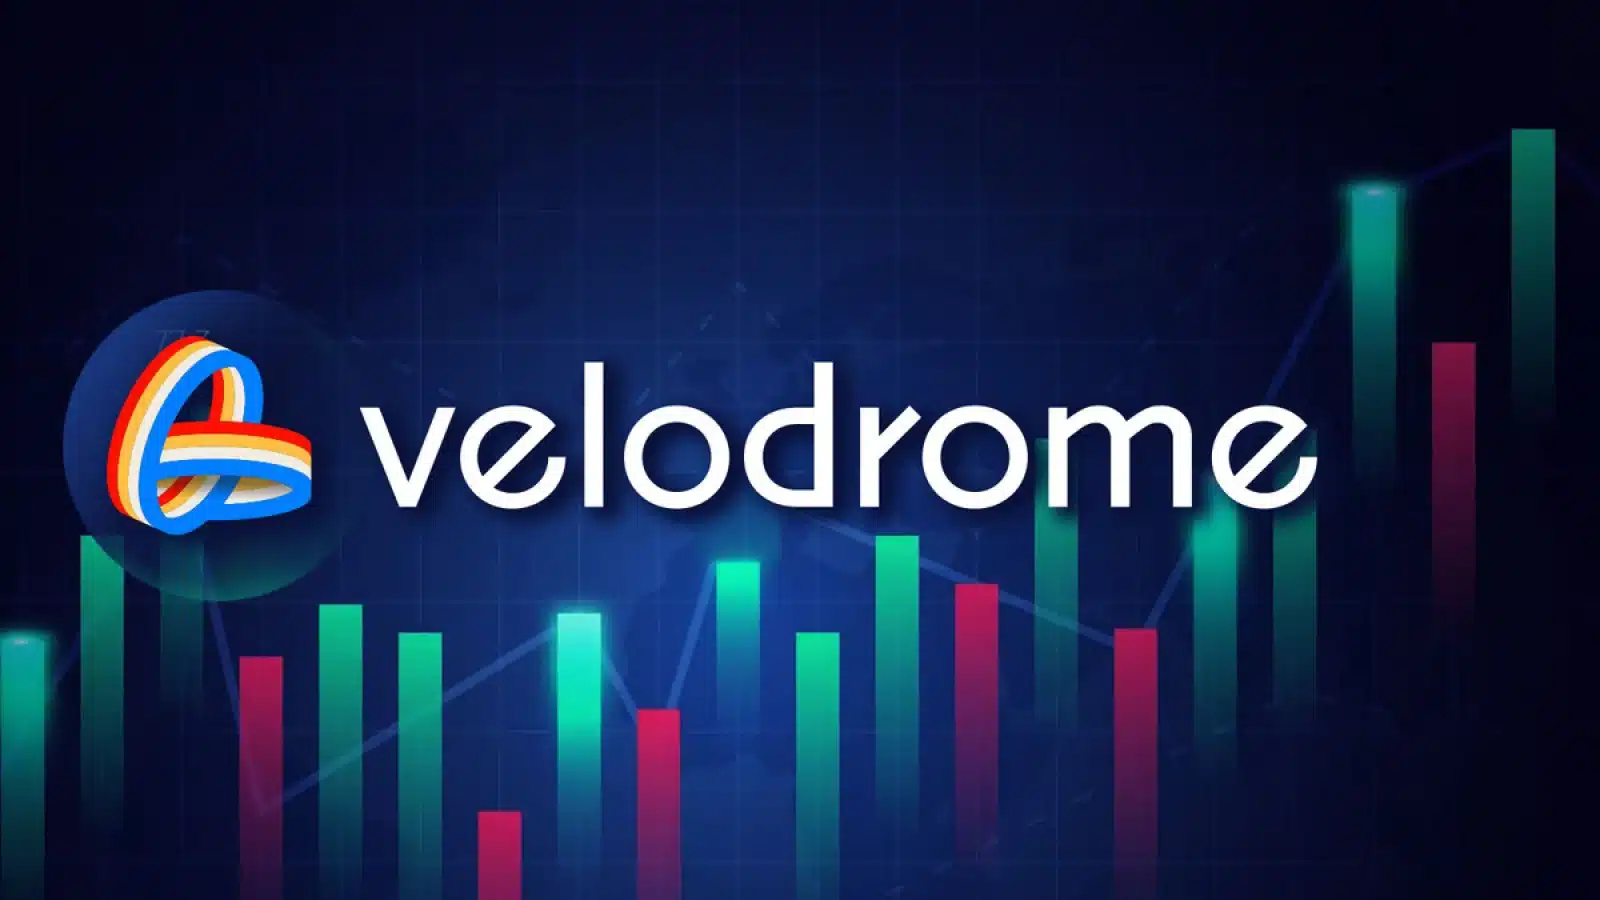 Velodrome (VELO) Volume Jumps 67% As US Lawmaker Discloses Stake